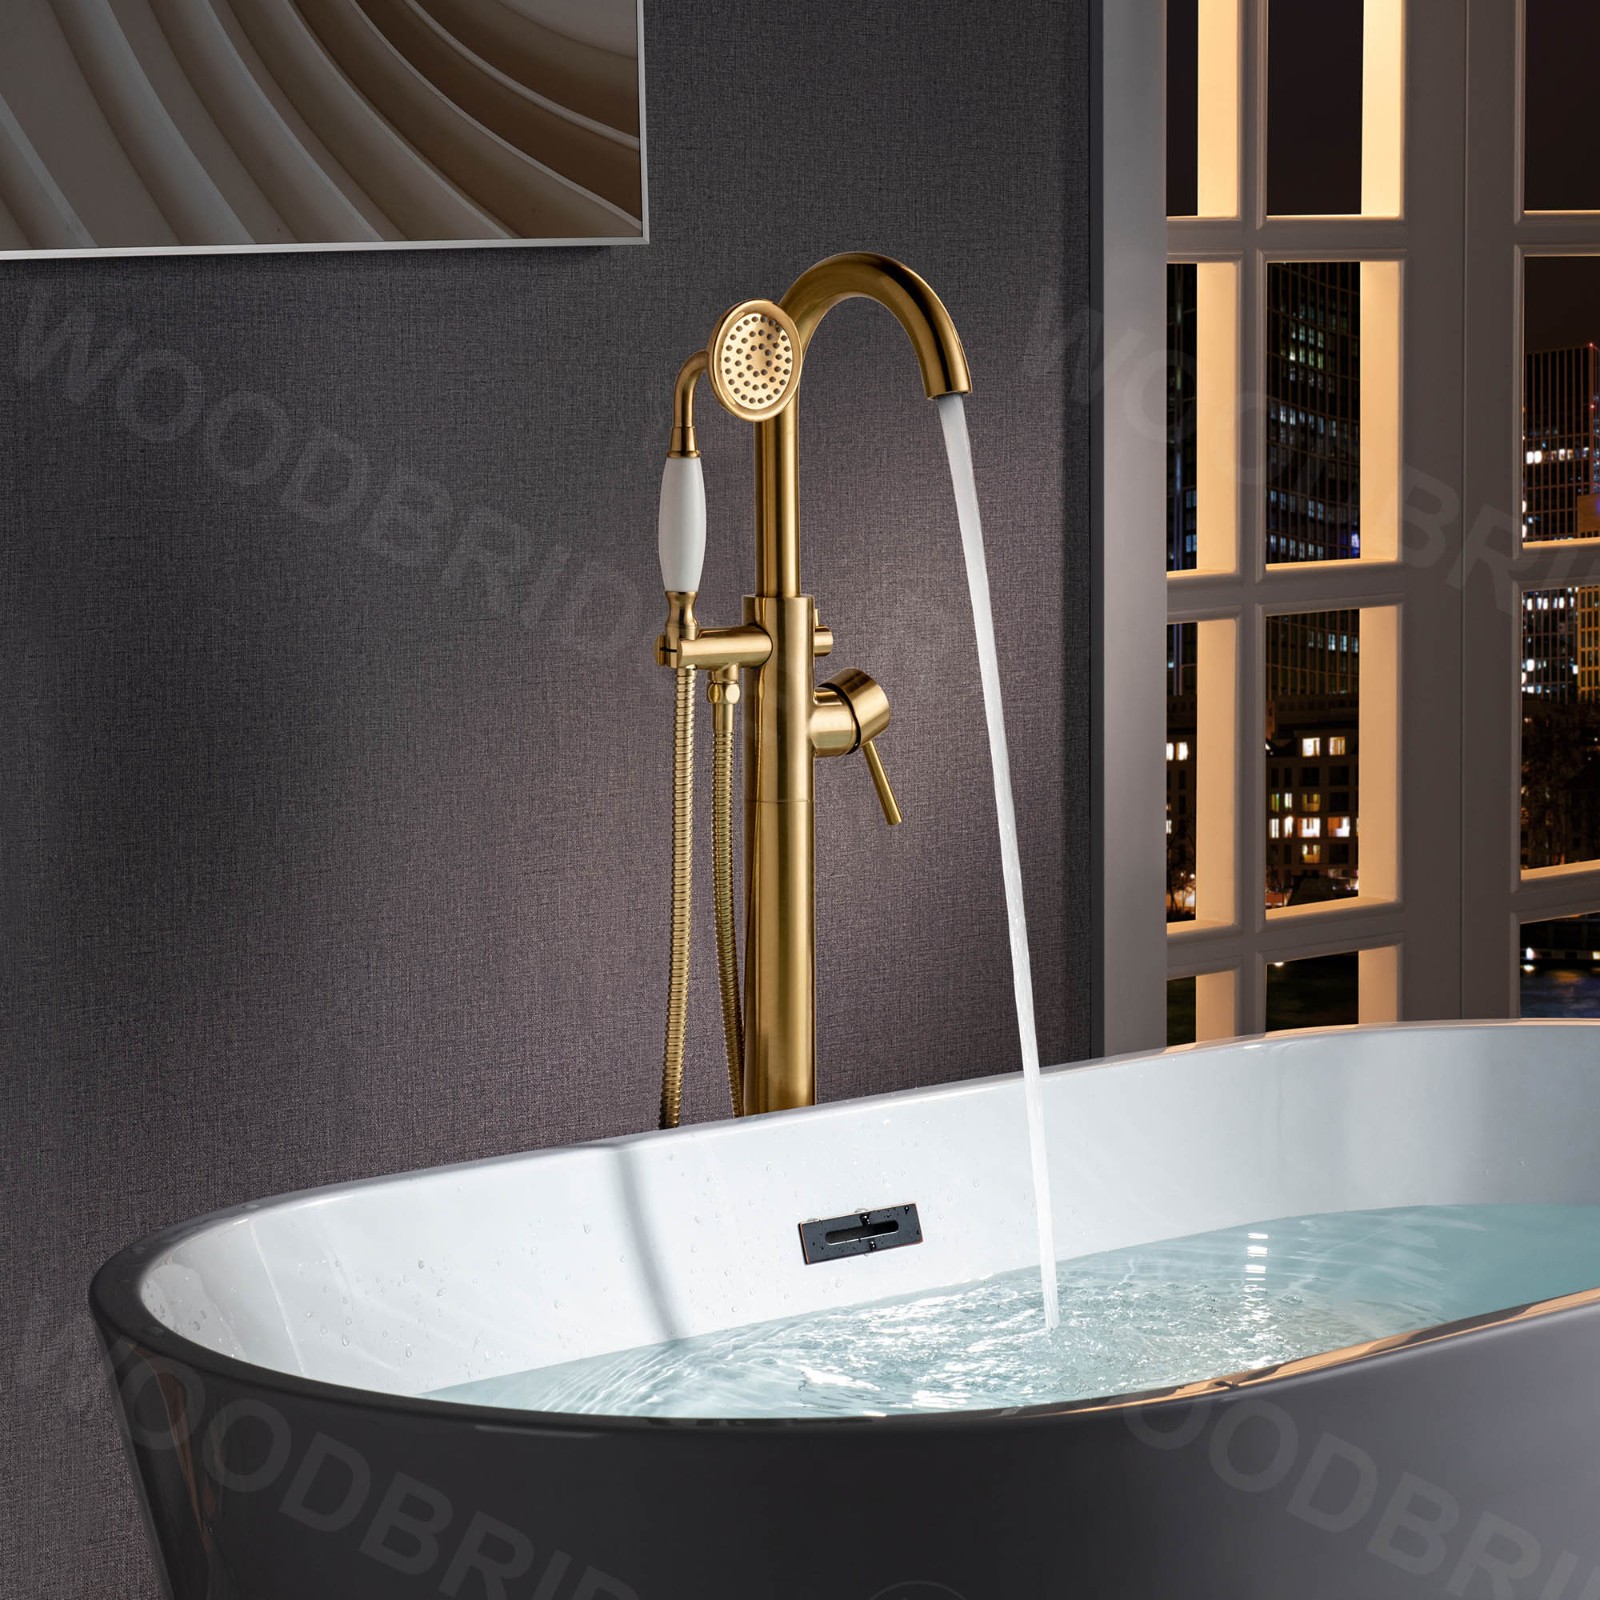  WOODBRIDGE F0026BGVT Fusion Single Handle Floor Mount Freestanding Tub Filler Faucet with Telephone Hand shower in Brushed Gold Finish._4185